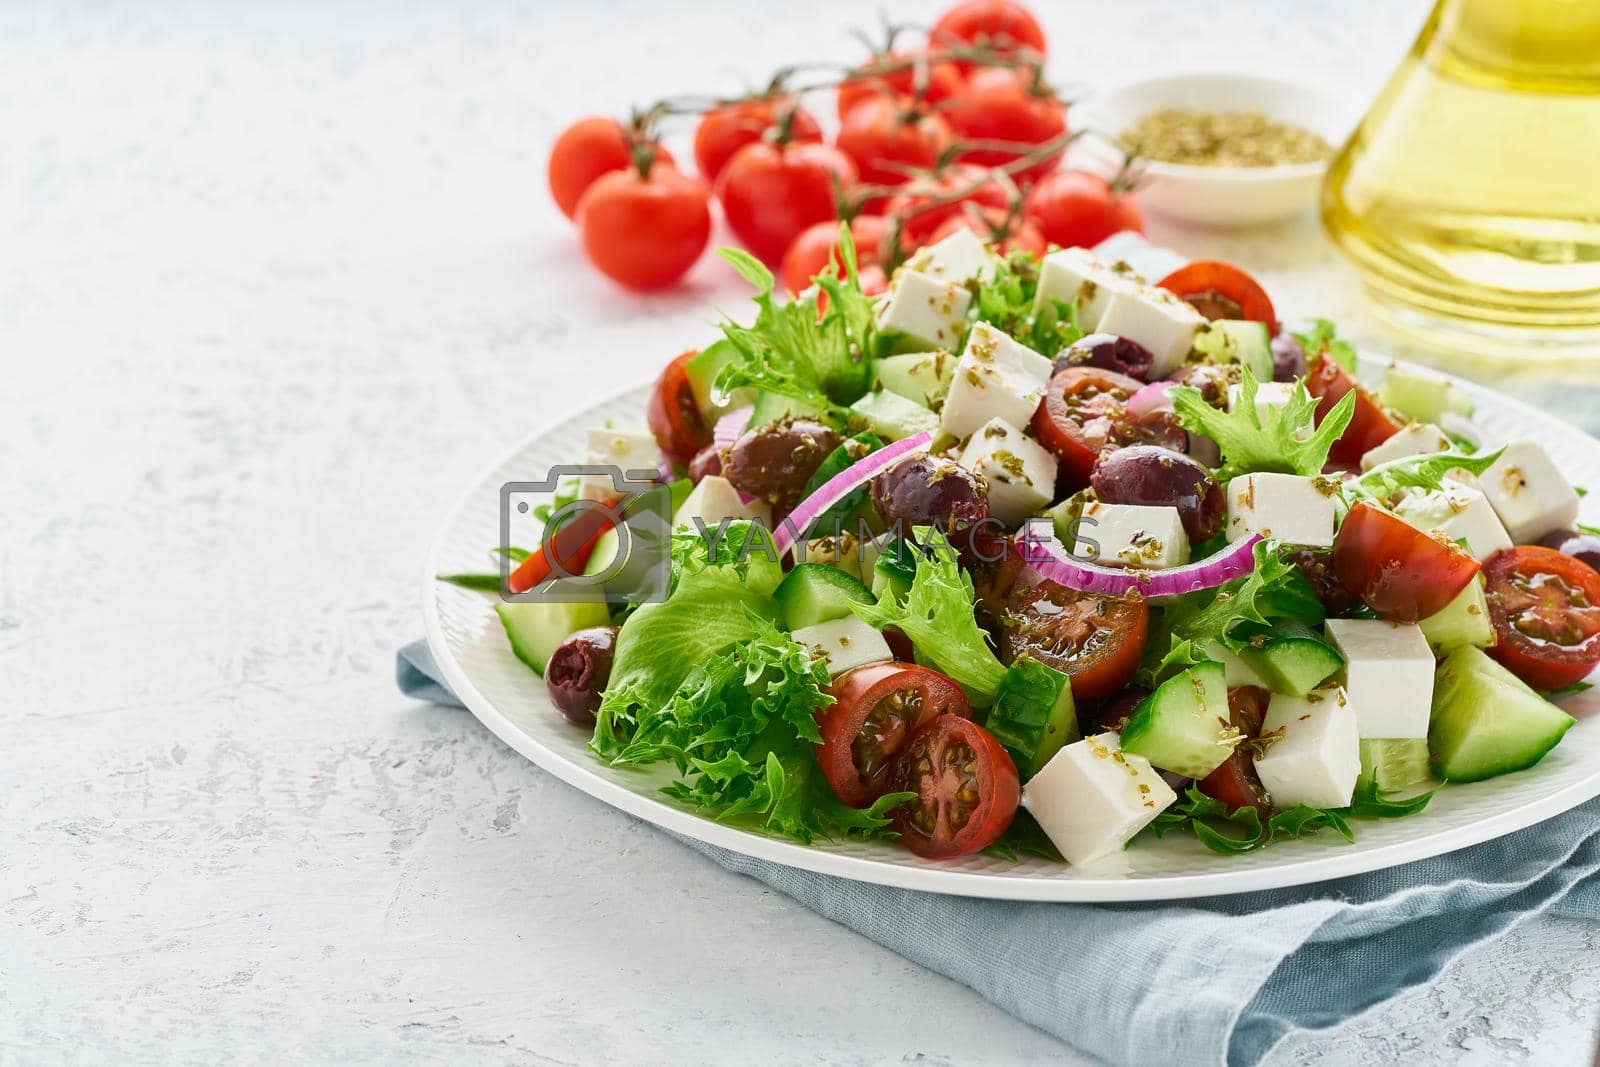 Royalty free image of Greek Salad with feta and tomatoes, dieting food on white background copy space closeup by NataBene